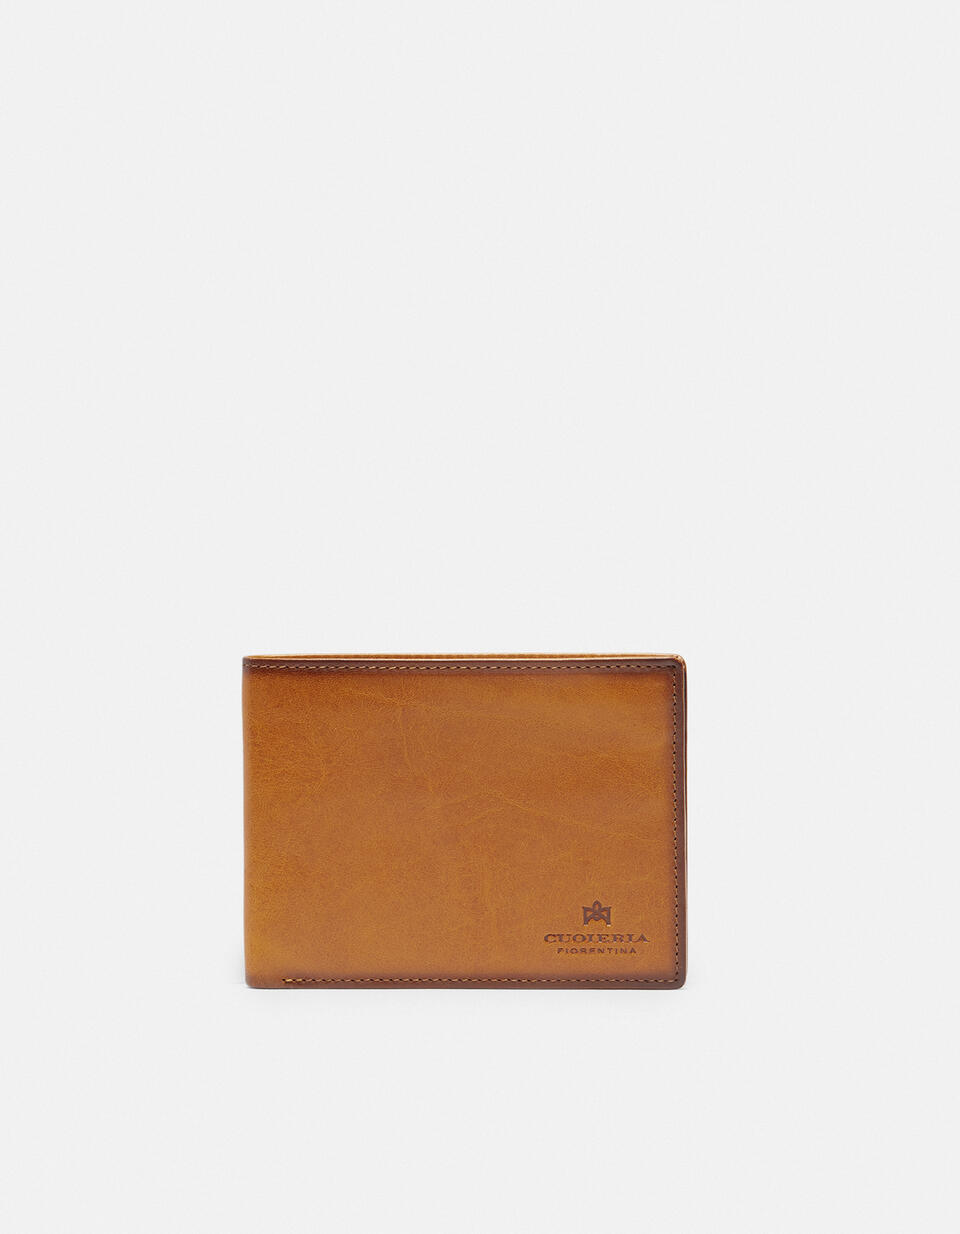 Leather Warm and Color Anti-RFid Wallet - Women's Wallets - Men's Wallets | Wallets GIALLO - Women's Wallets - Men's Wallets | WalletsCuoieria Fiorentina